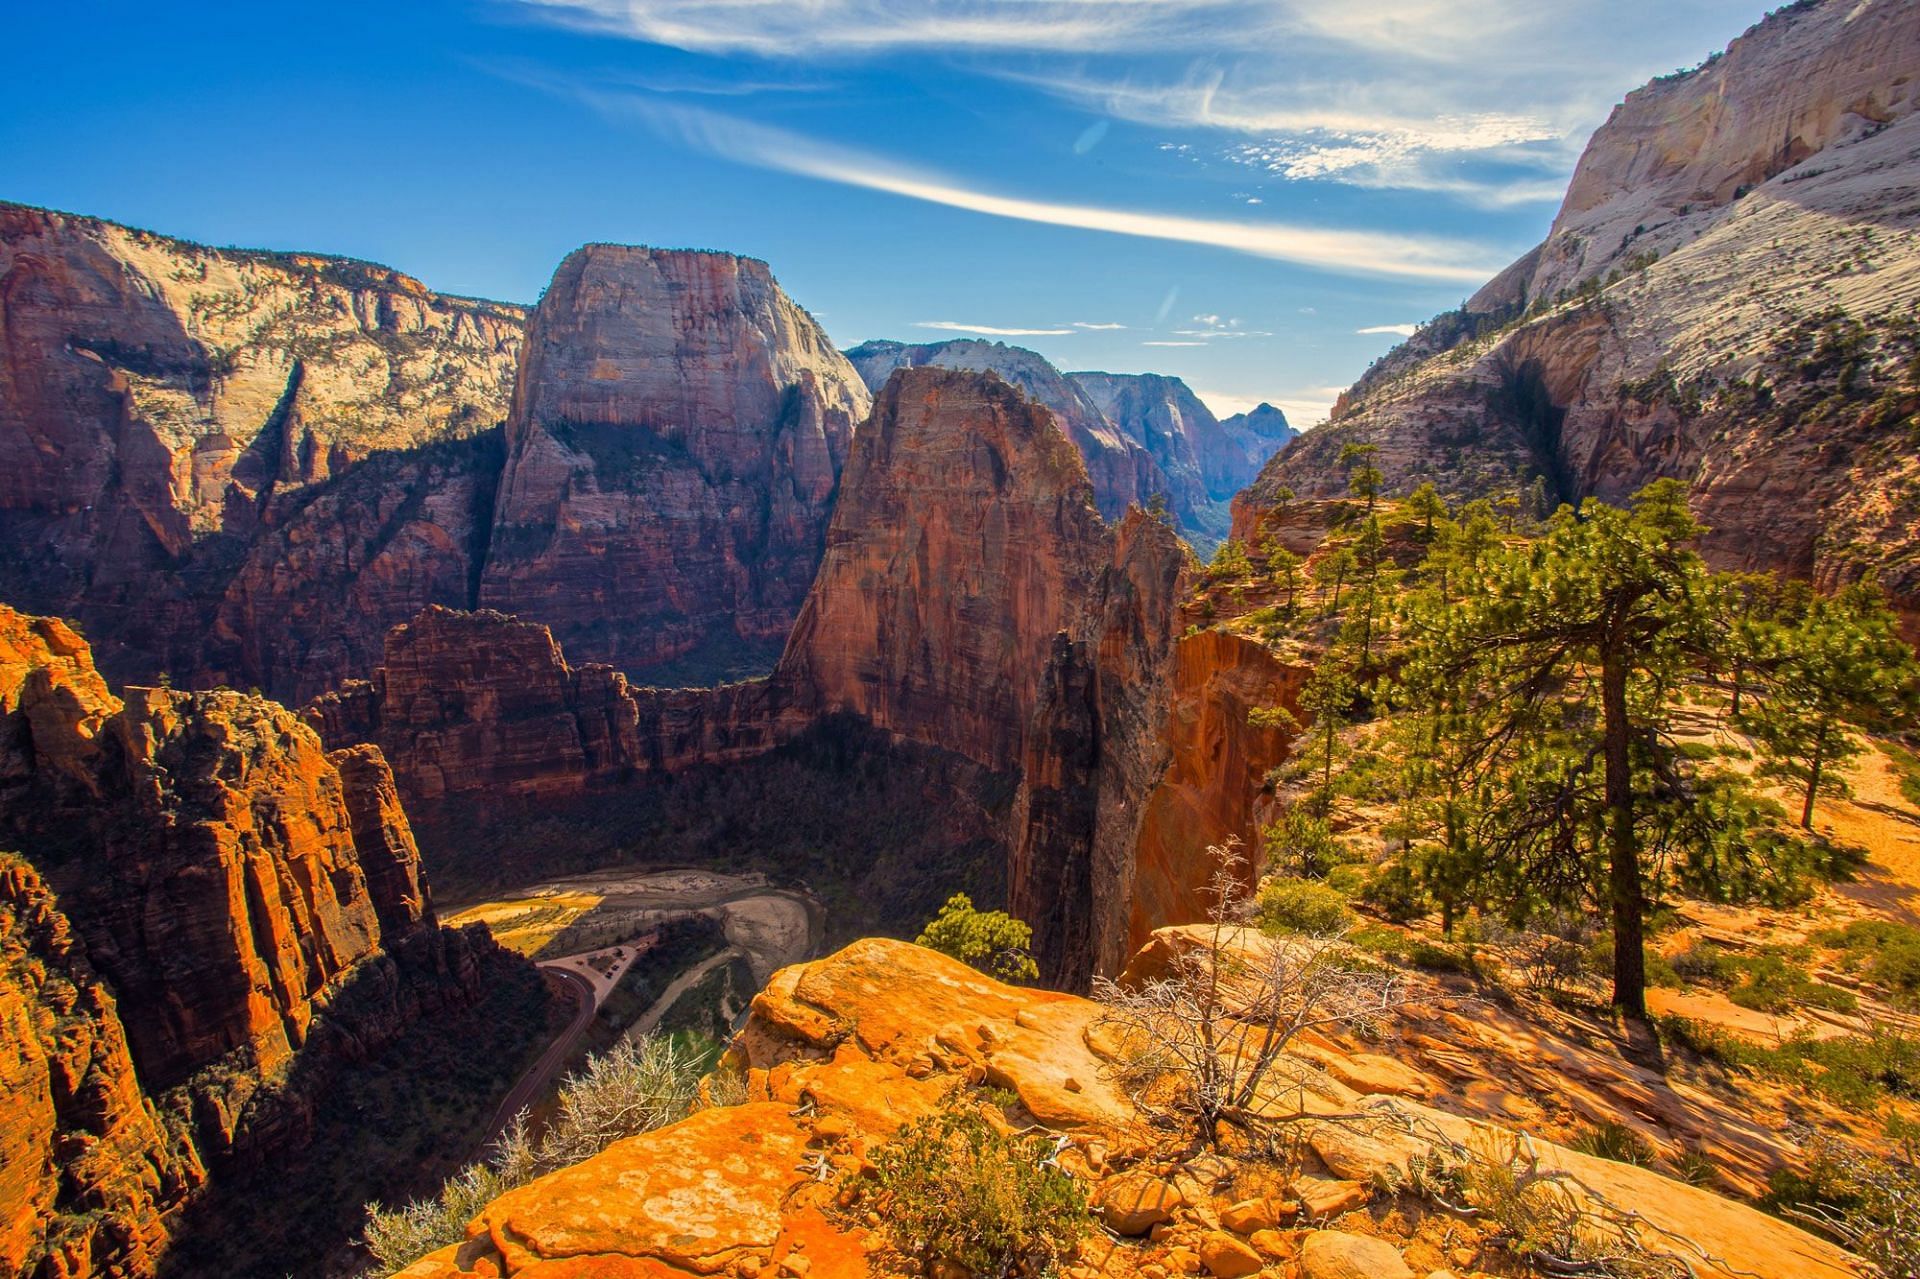 What Are The Symptoms Of Hypothermia Woman Dies In Zion National Park While Hiking With Husband